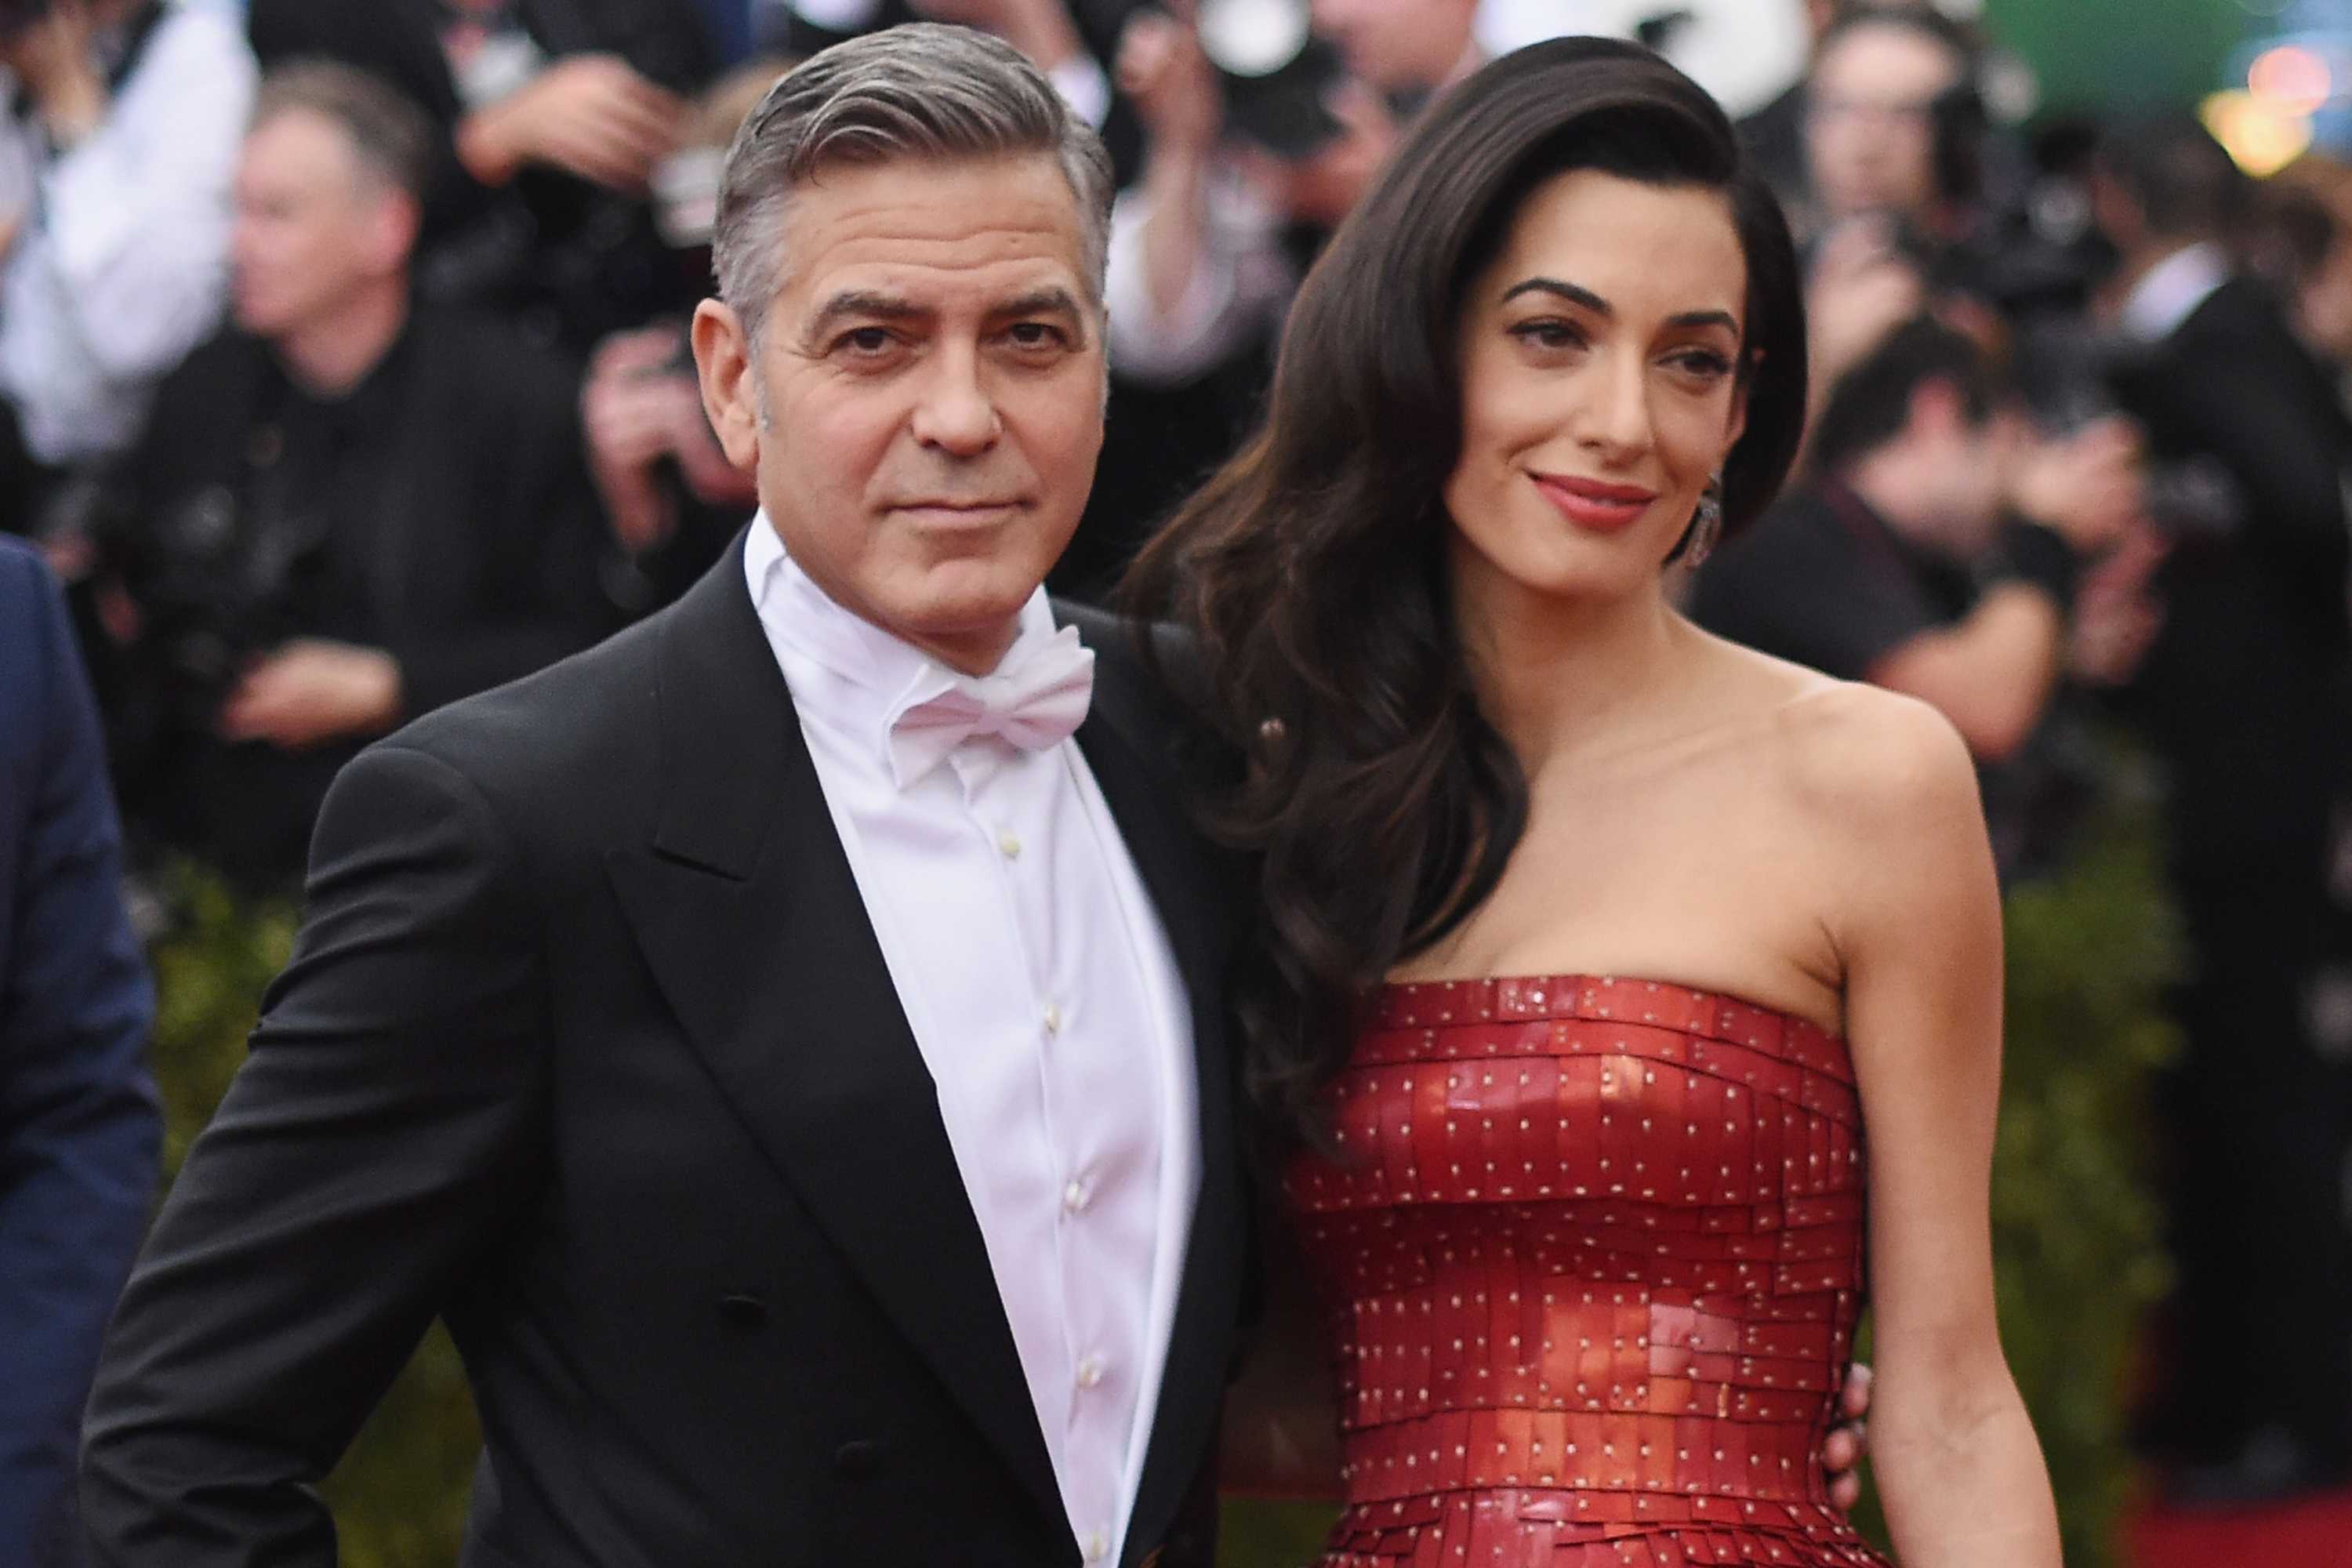 George Clooney Vows to "Prosecute" Following Paparazzi Incident With Twins